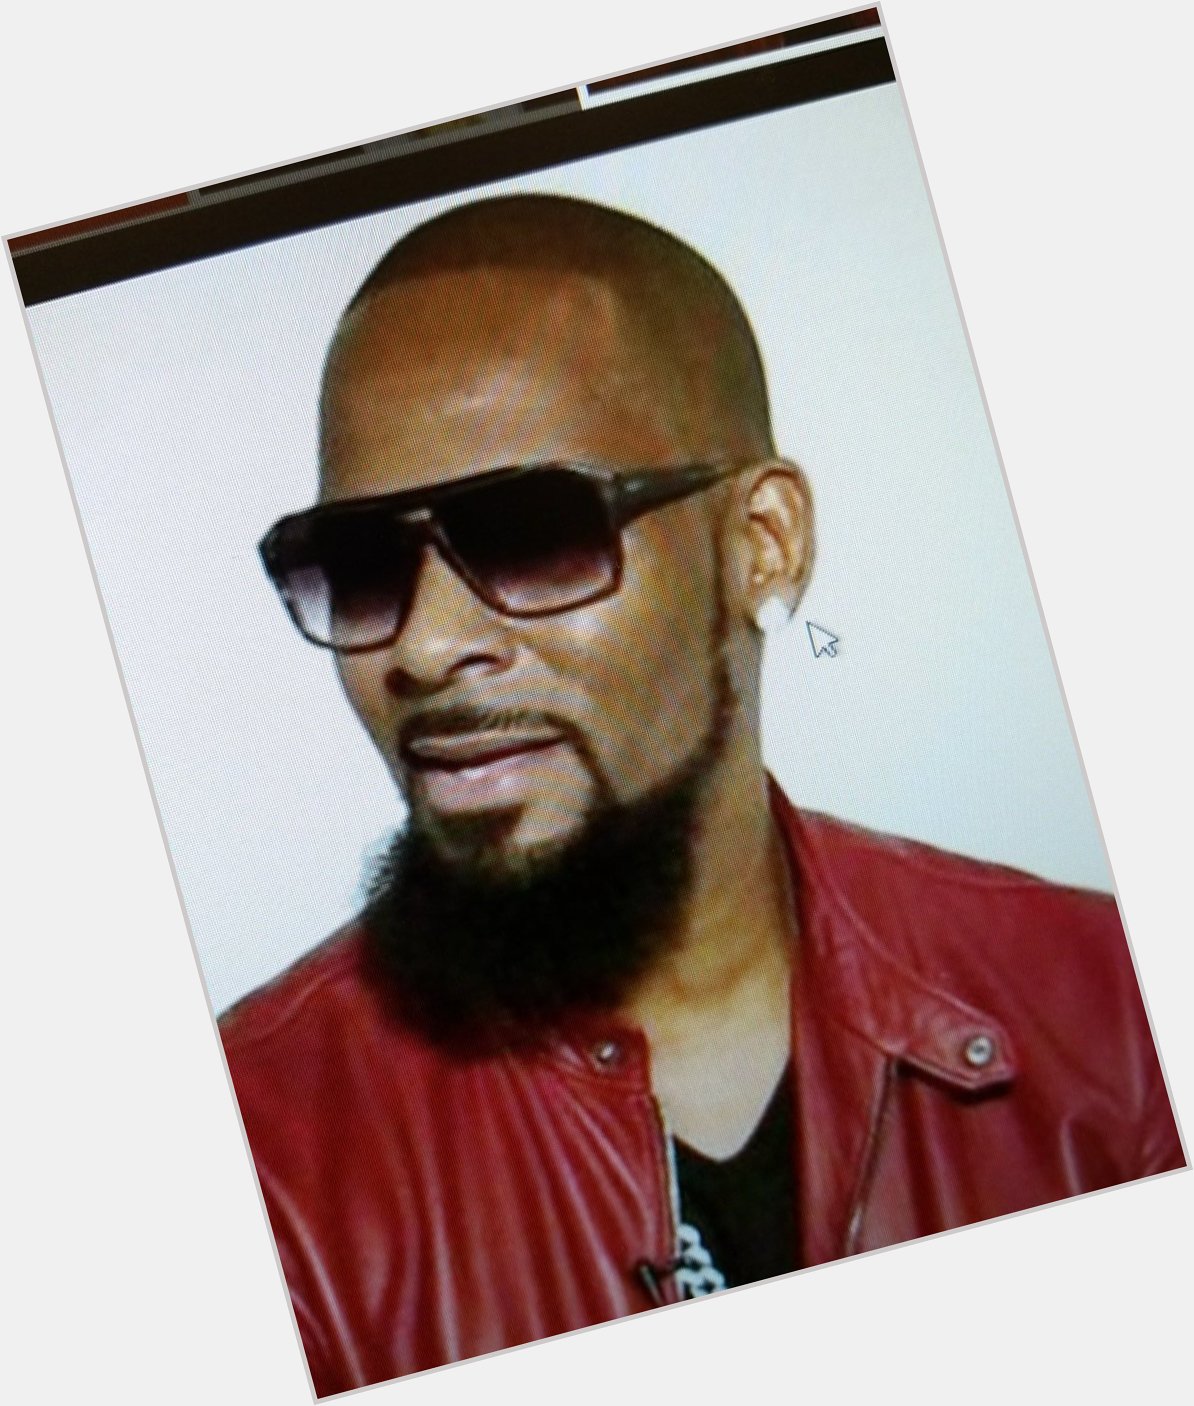 Happy Birthday to the Pied Piper and   King of R&B R. Kelly. May God Coninute to Bless You. 